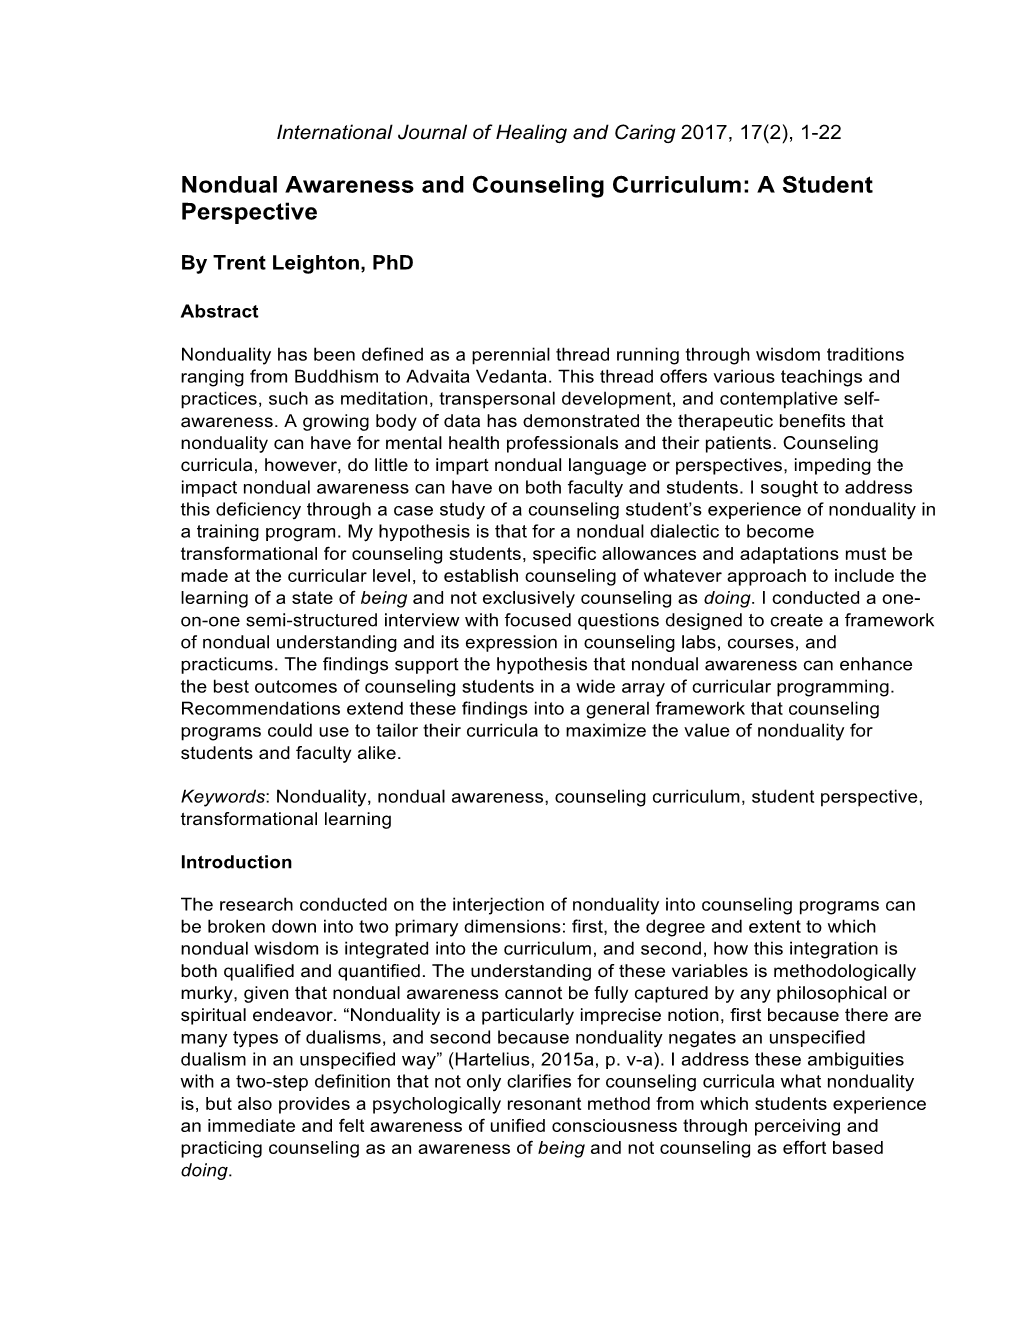 Nondual Awareness and Counseling Curriculum: a Student Perspective